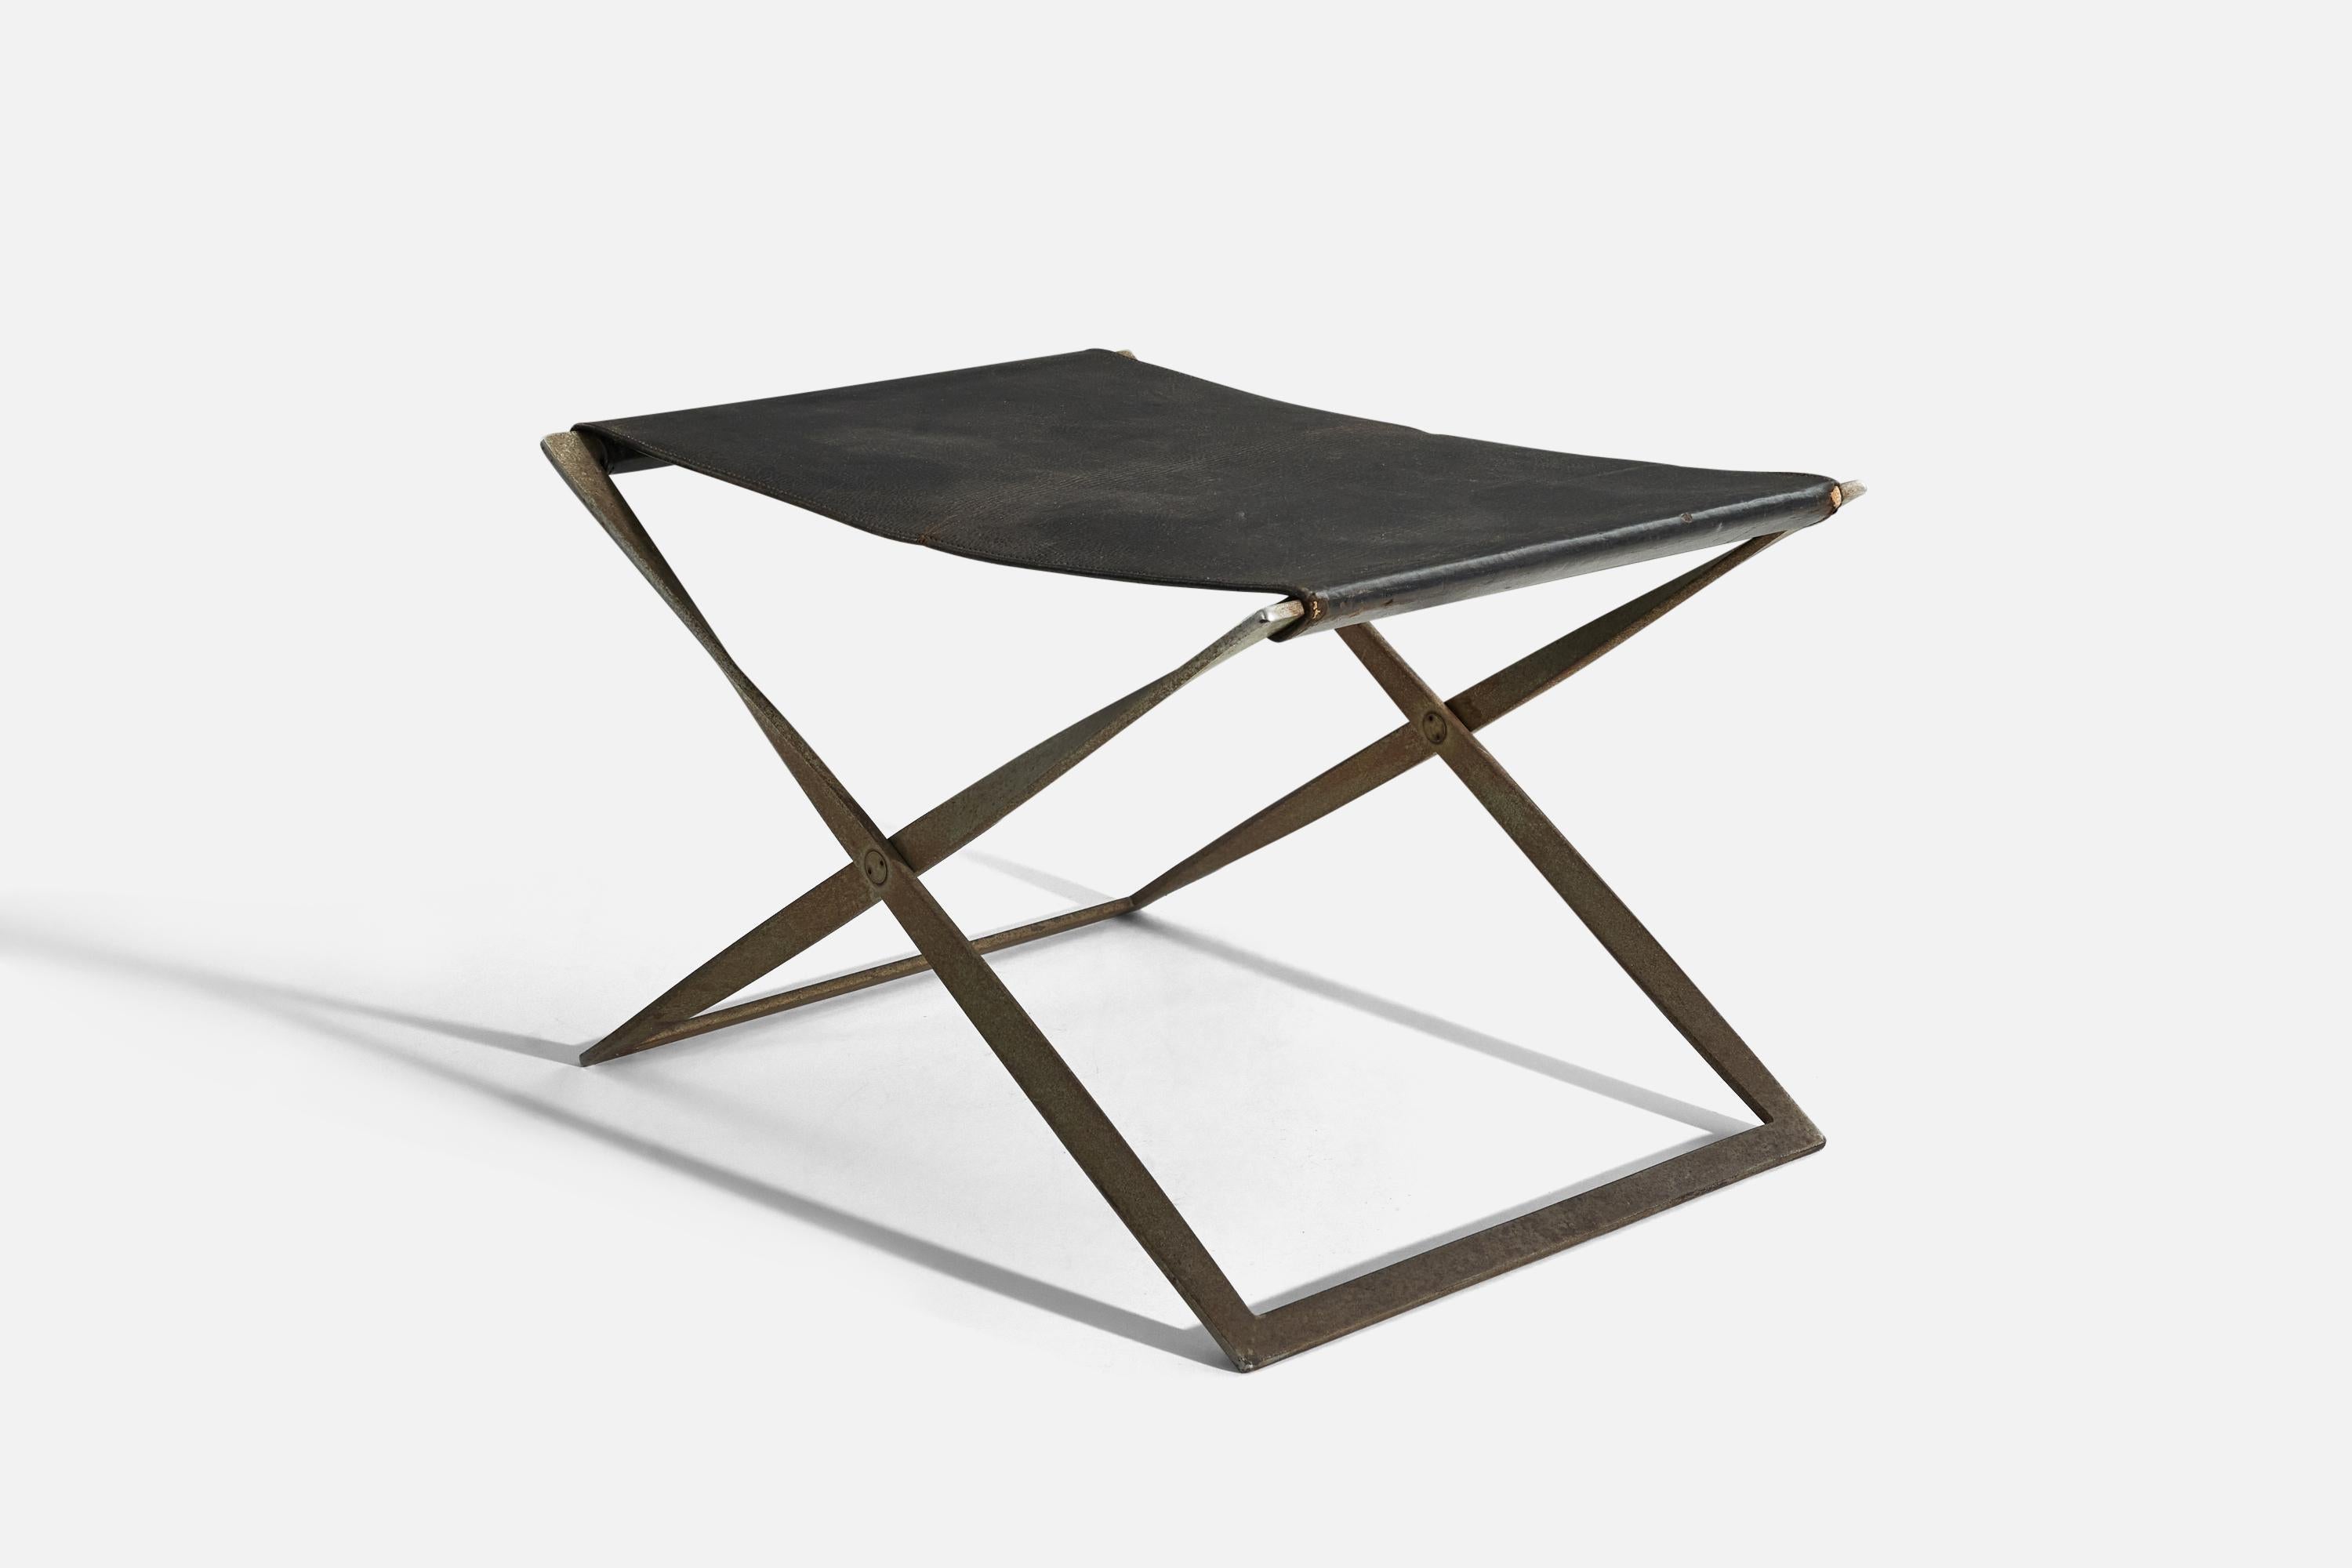 A chrome-plated steel and leather foldable stool designed by Poul Kjærholm and produced by E. Kold Christensen, Denmark, 1961. 

Makers mark impressed to frame.

